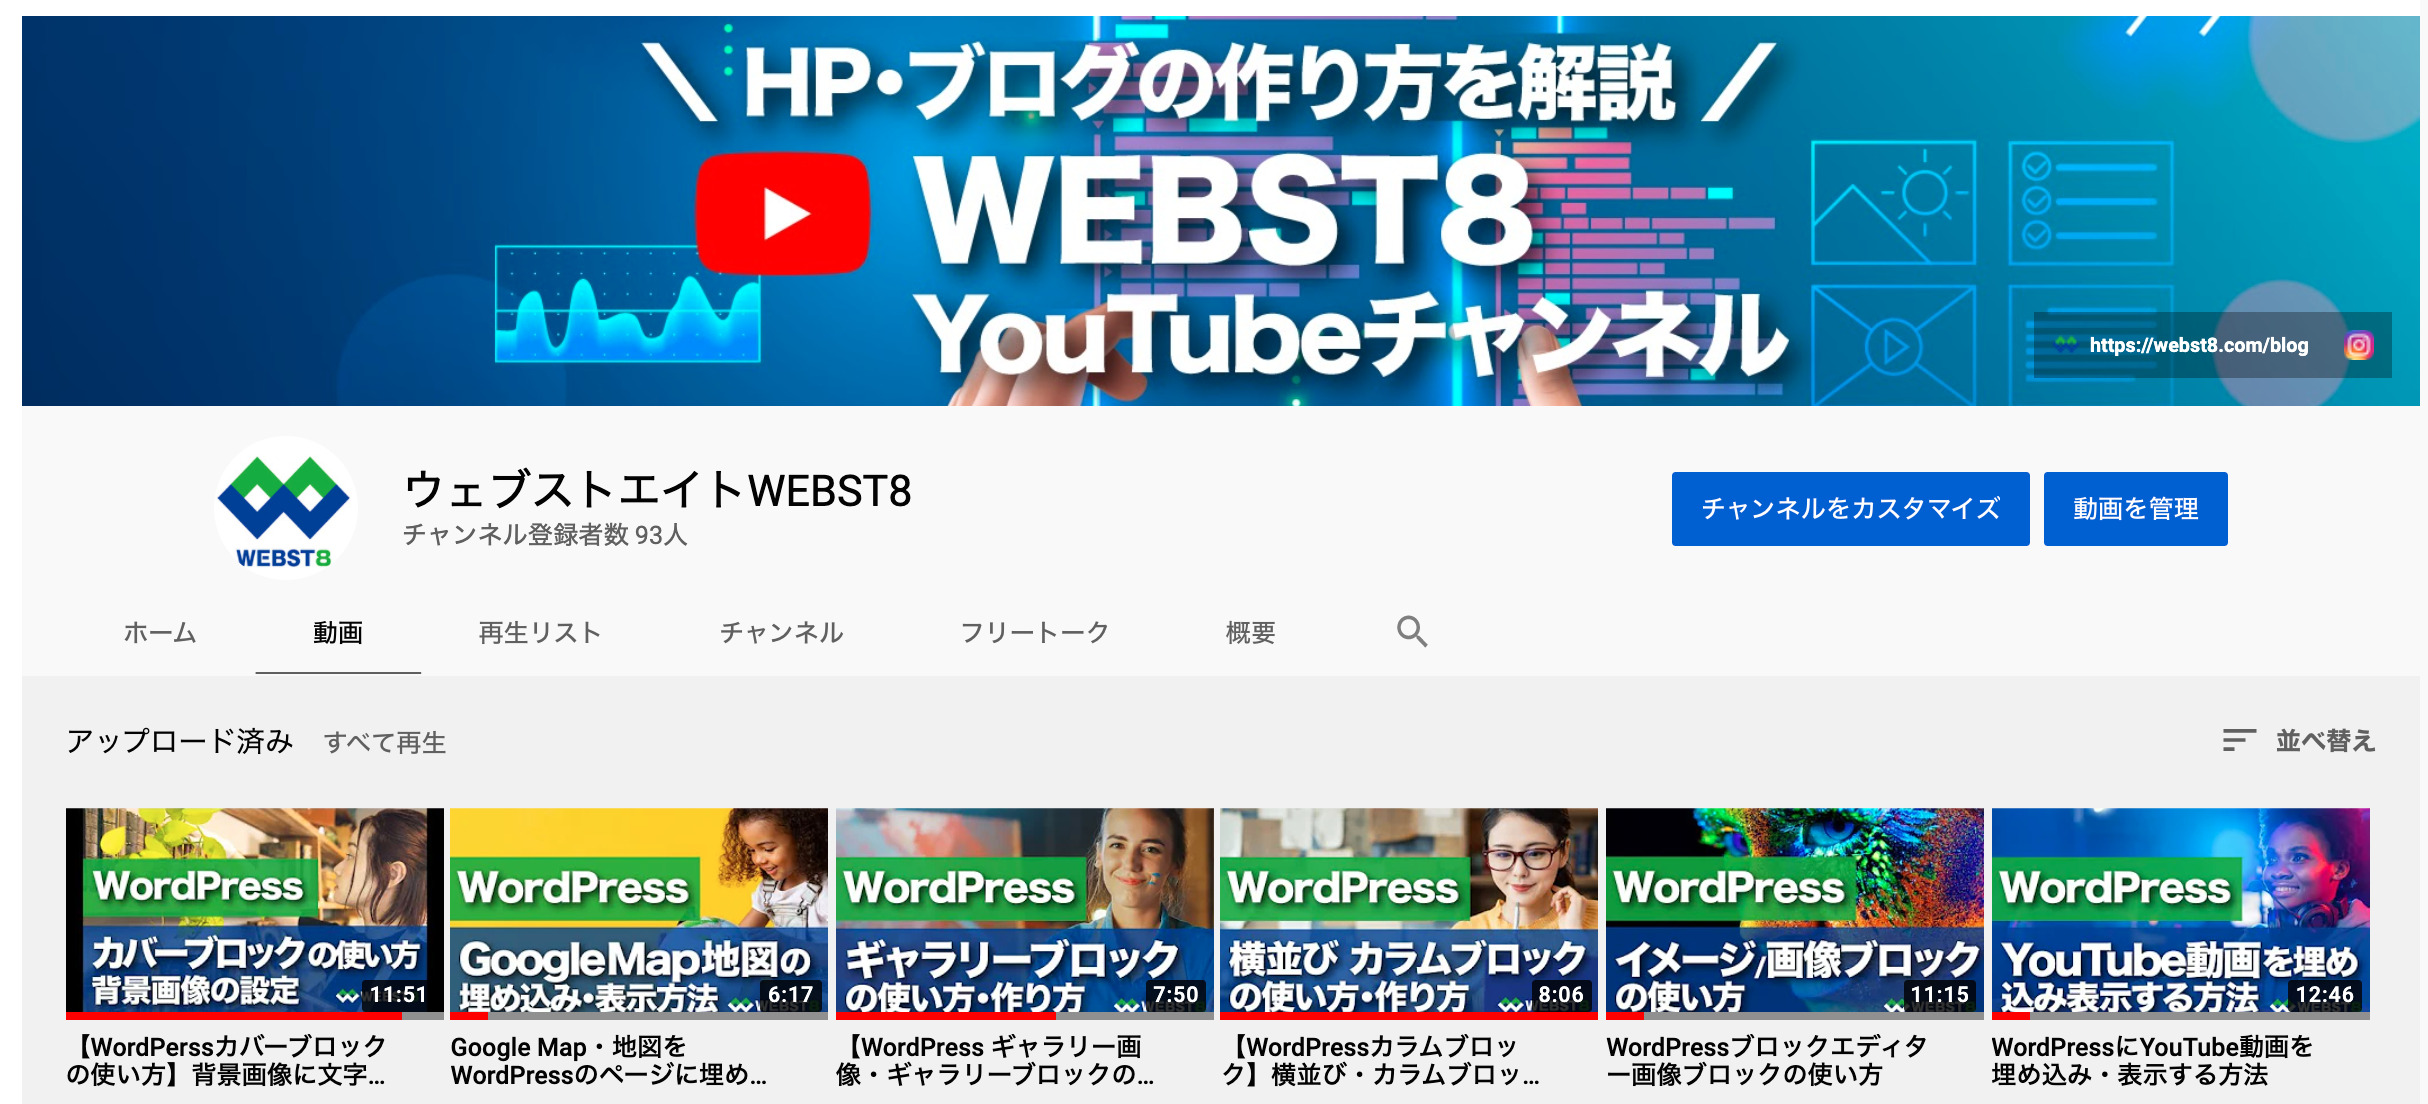 WEBST8　YouTube Channel　開設